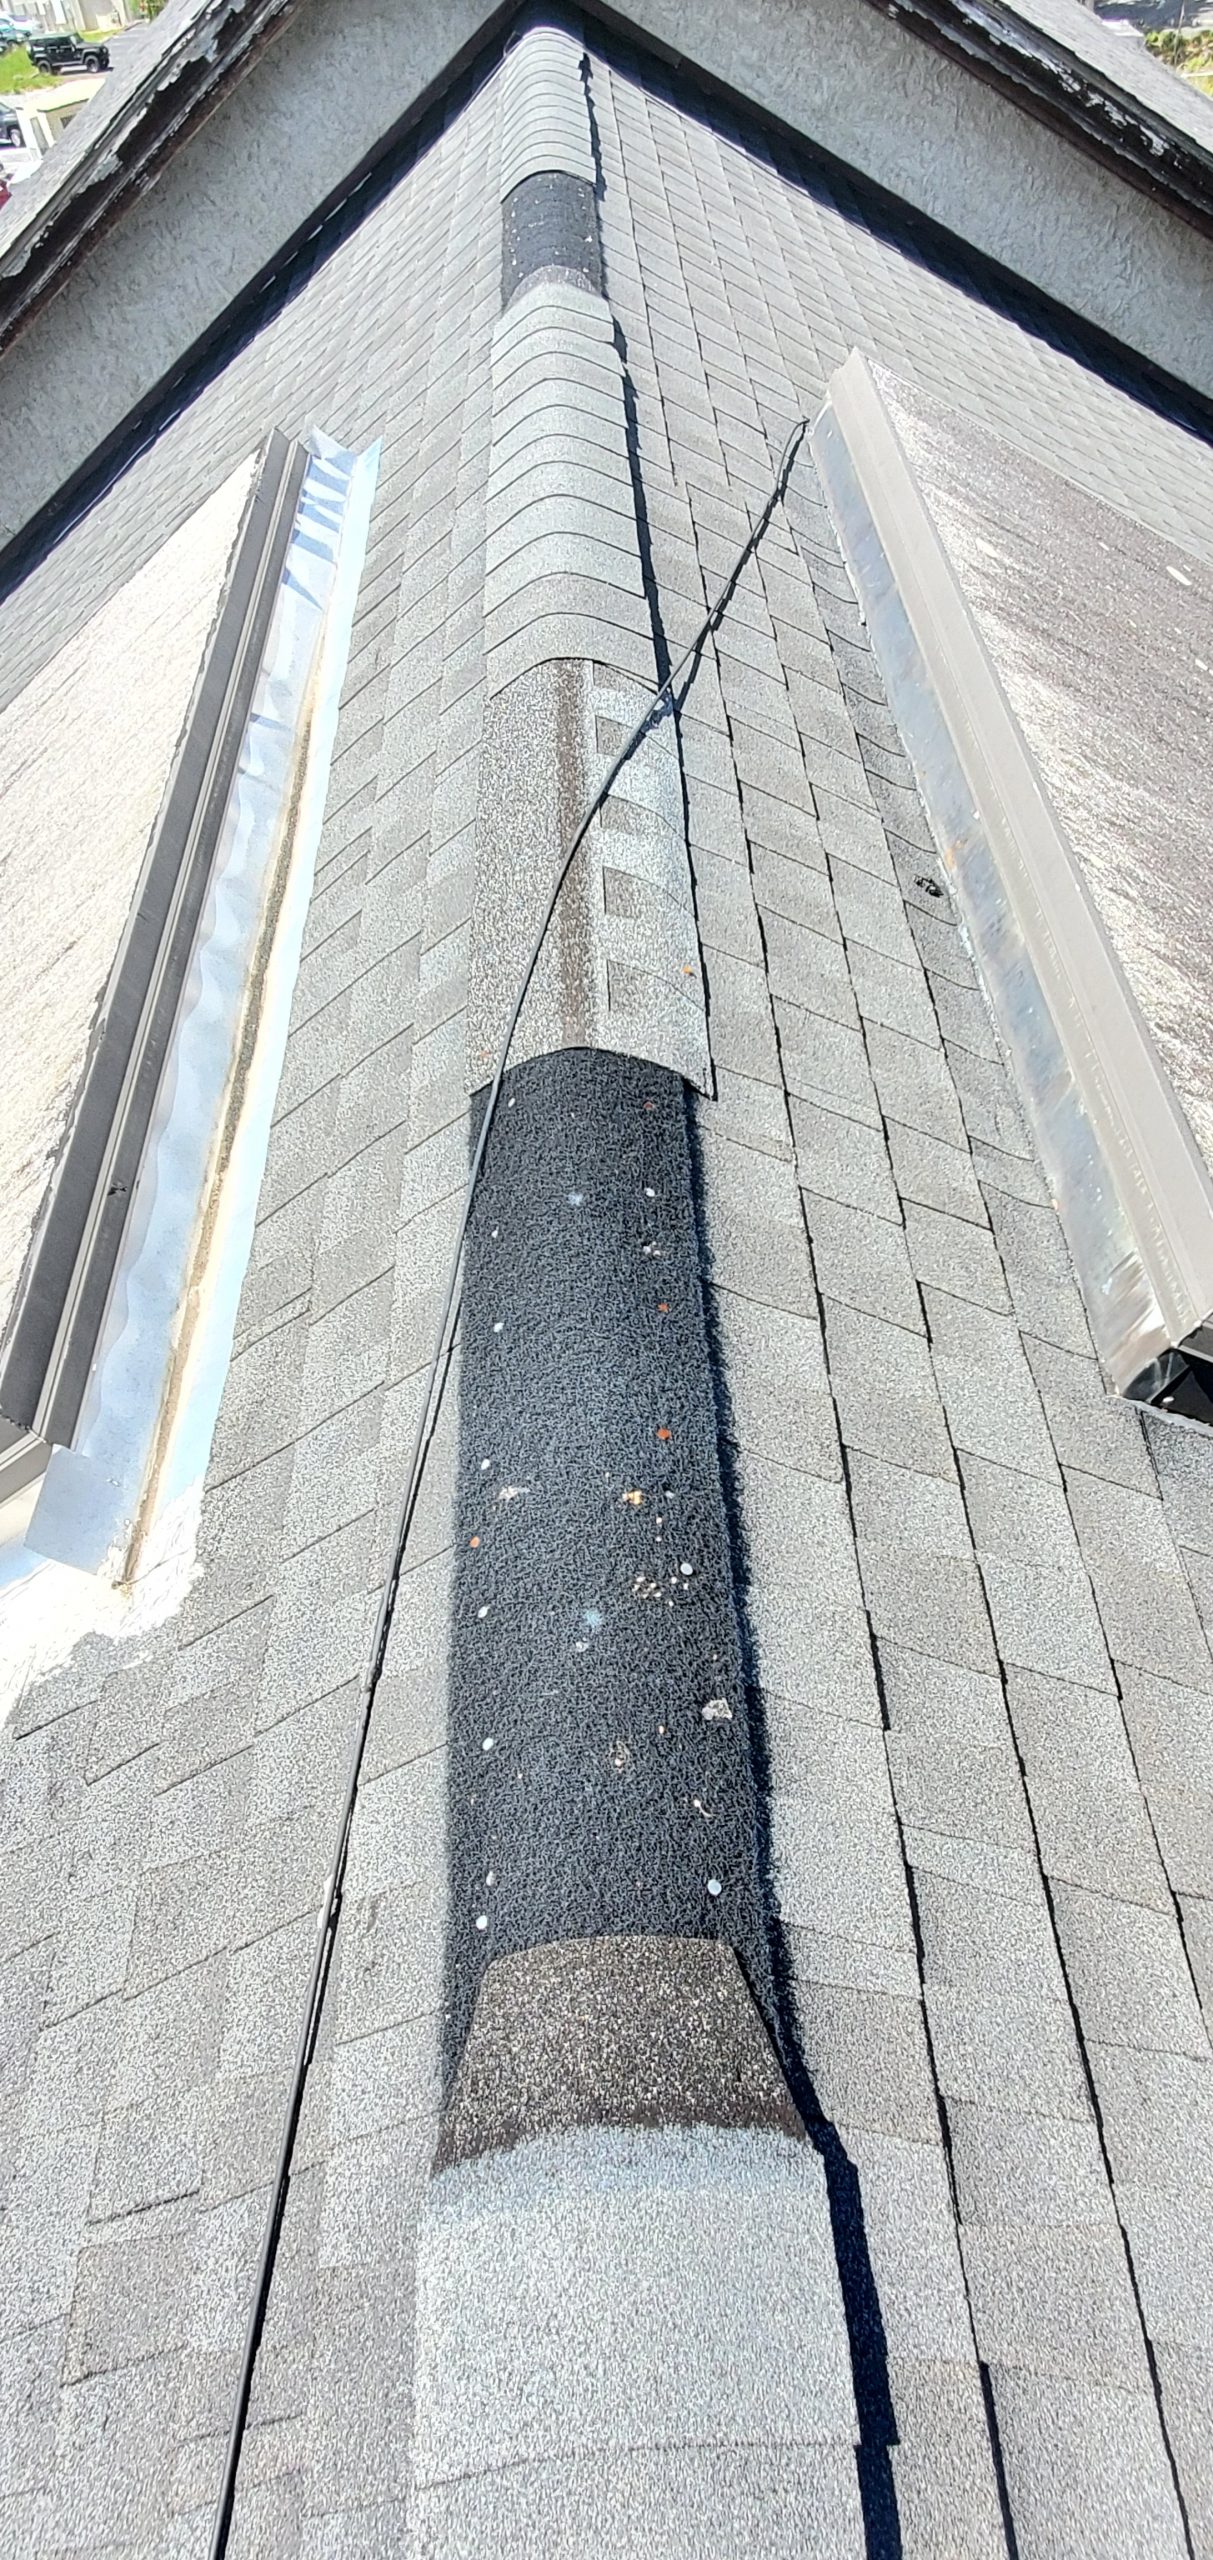 An up close view of the missing ridge cap shingles on the ridge of the roof. 